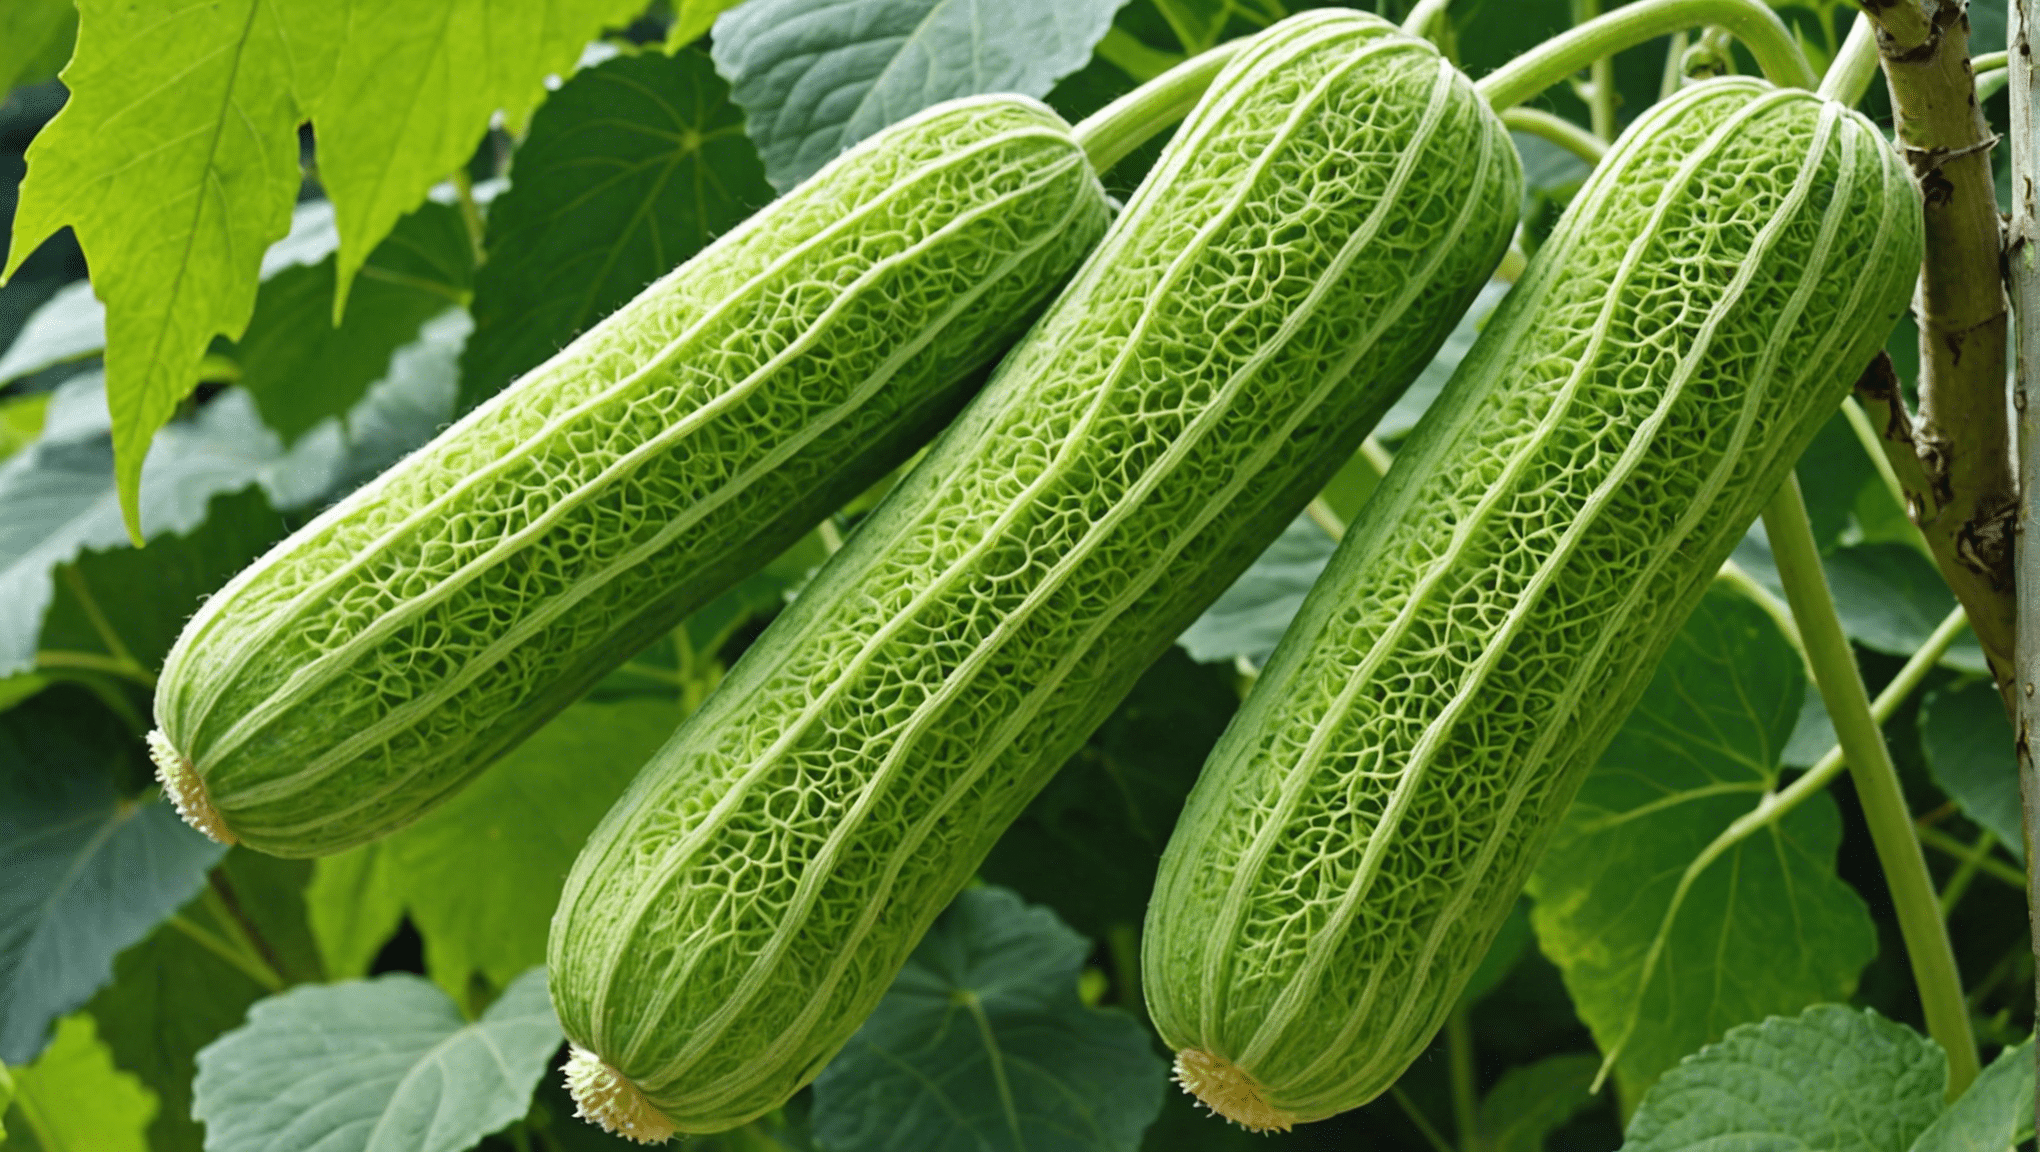 discover the numerous benefits of luffa seeds and how they can contribute to a healthy lifestyle. learn about their nutritional value and potential uses in cooking, skincare, and more.